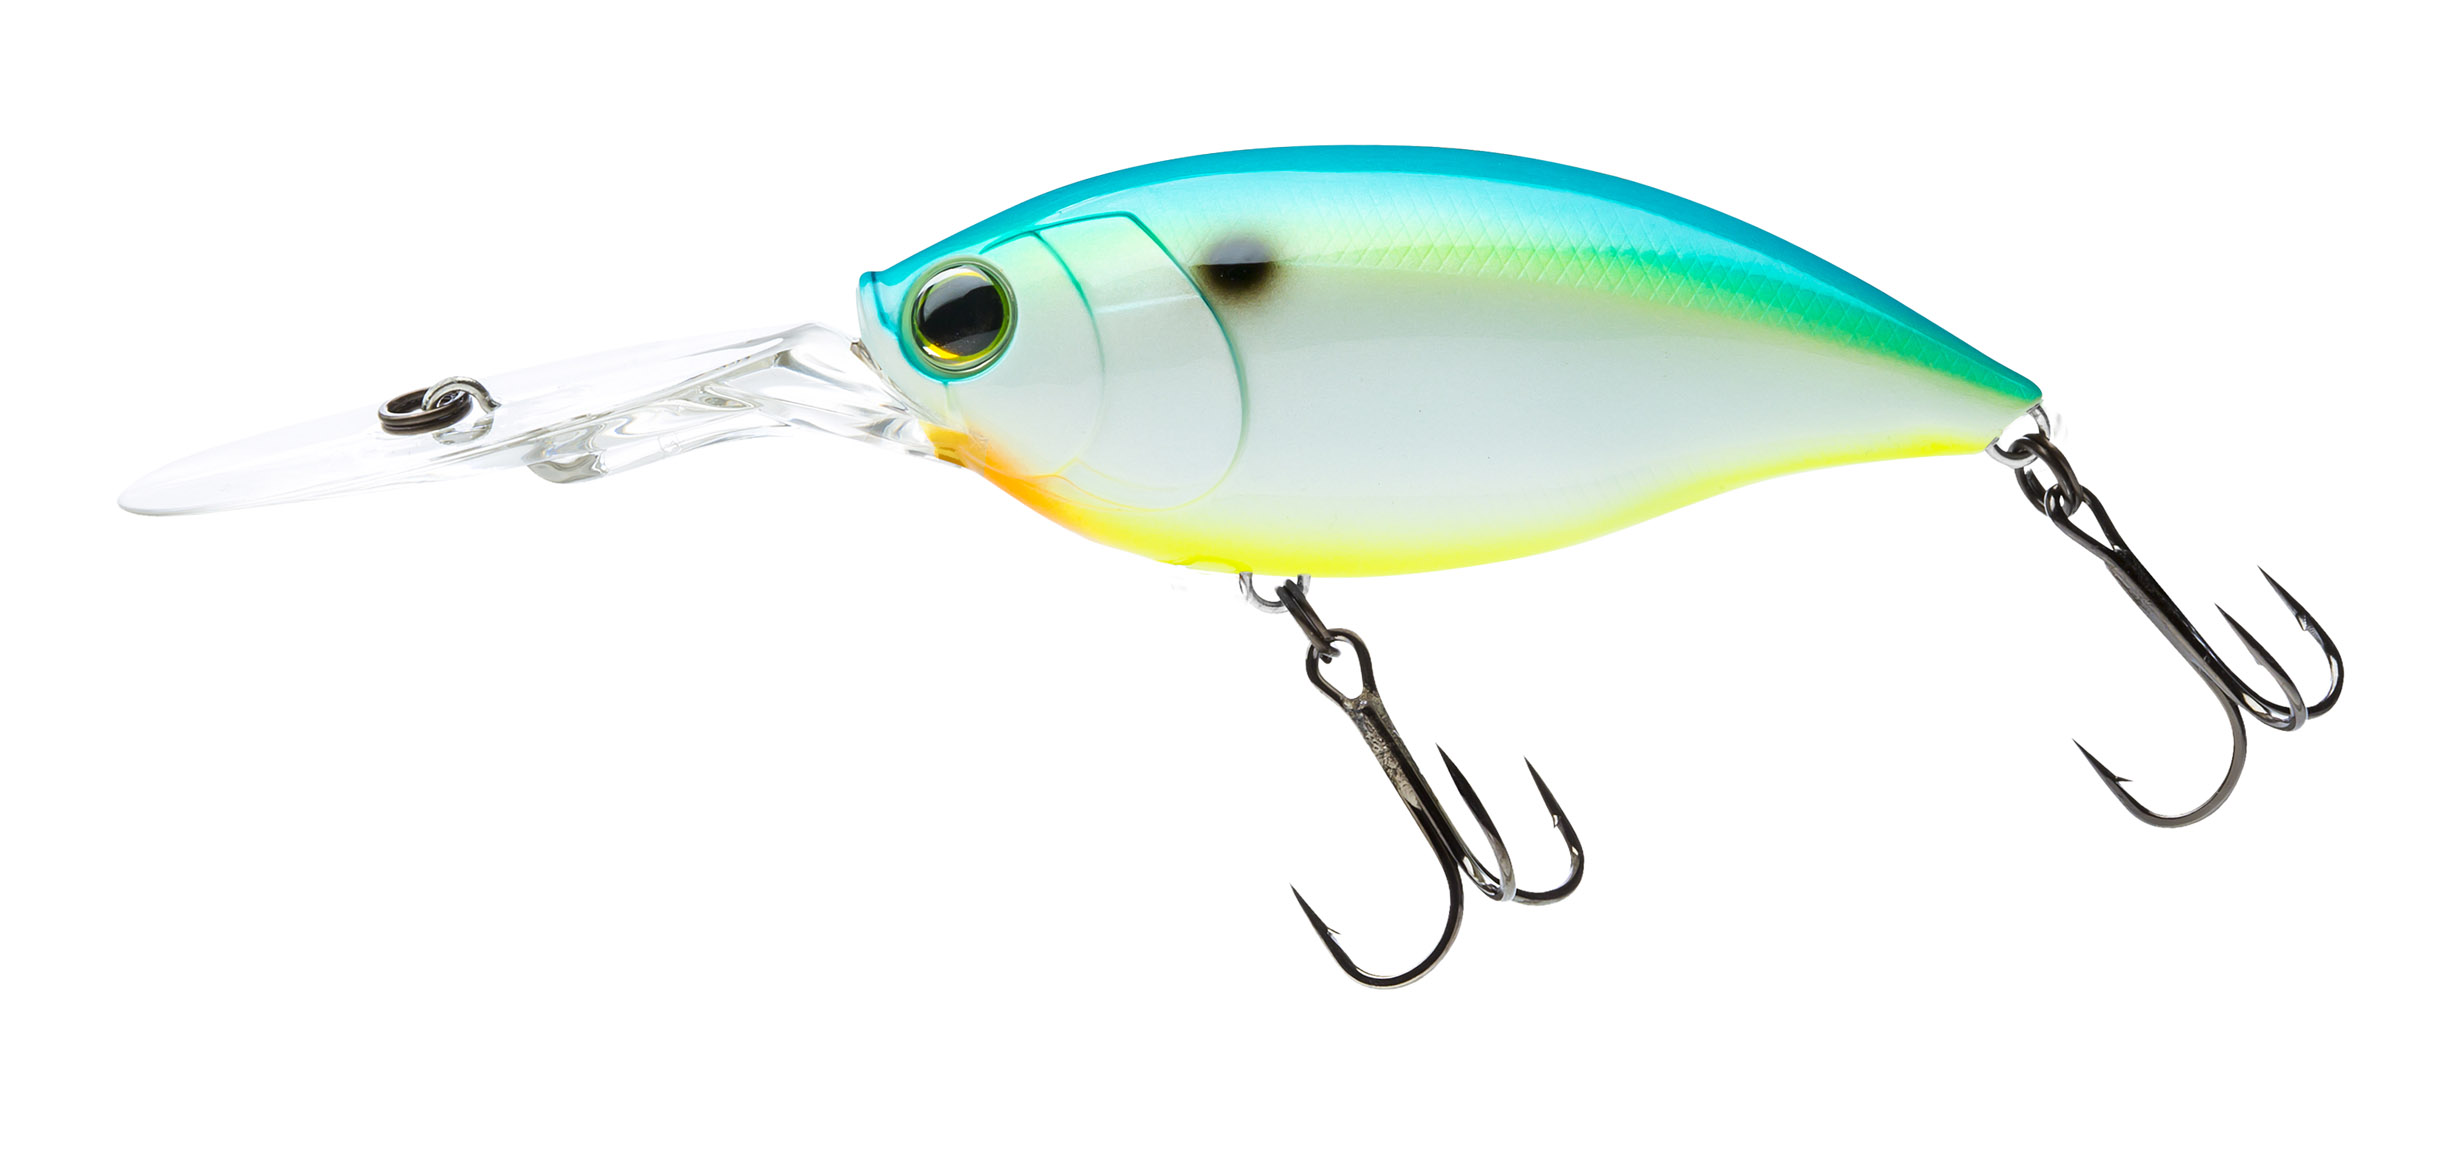 Buy Crank Baits Lures for Bass Deep Diving Top Water Hard Lures